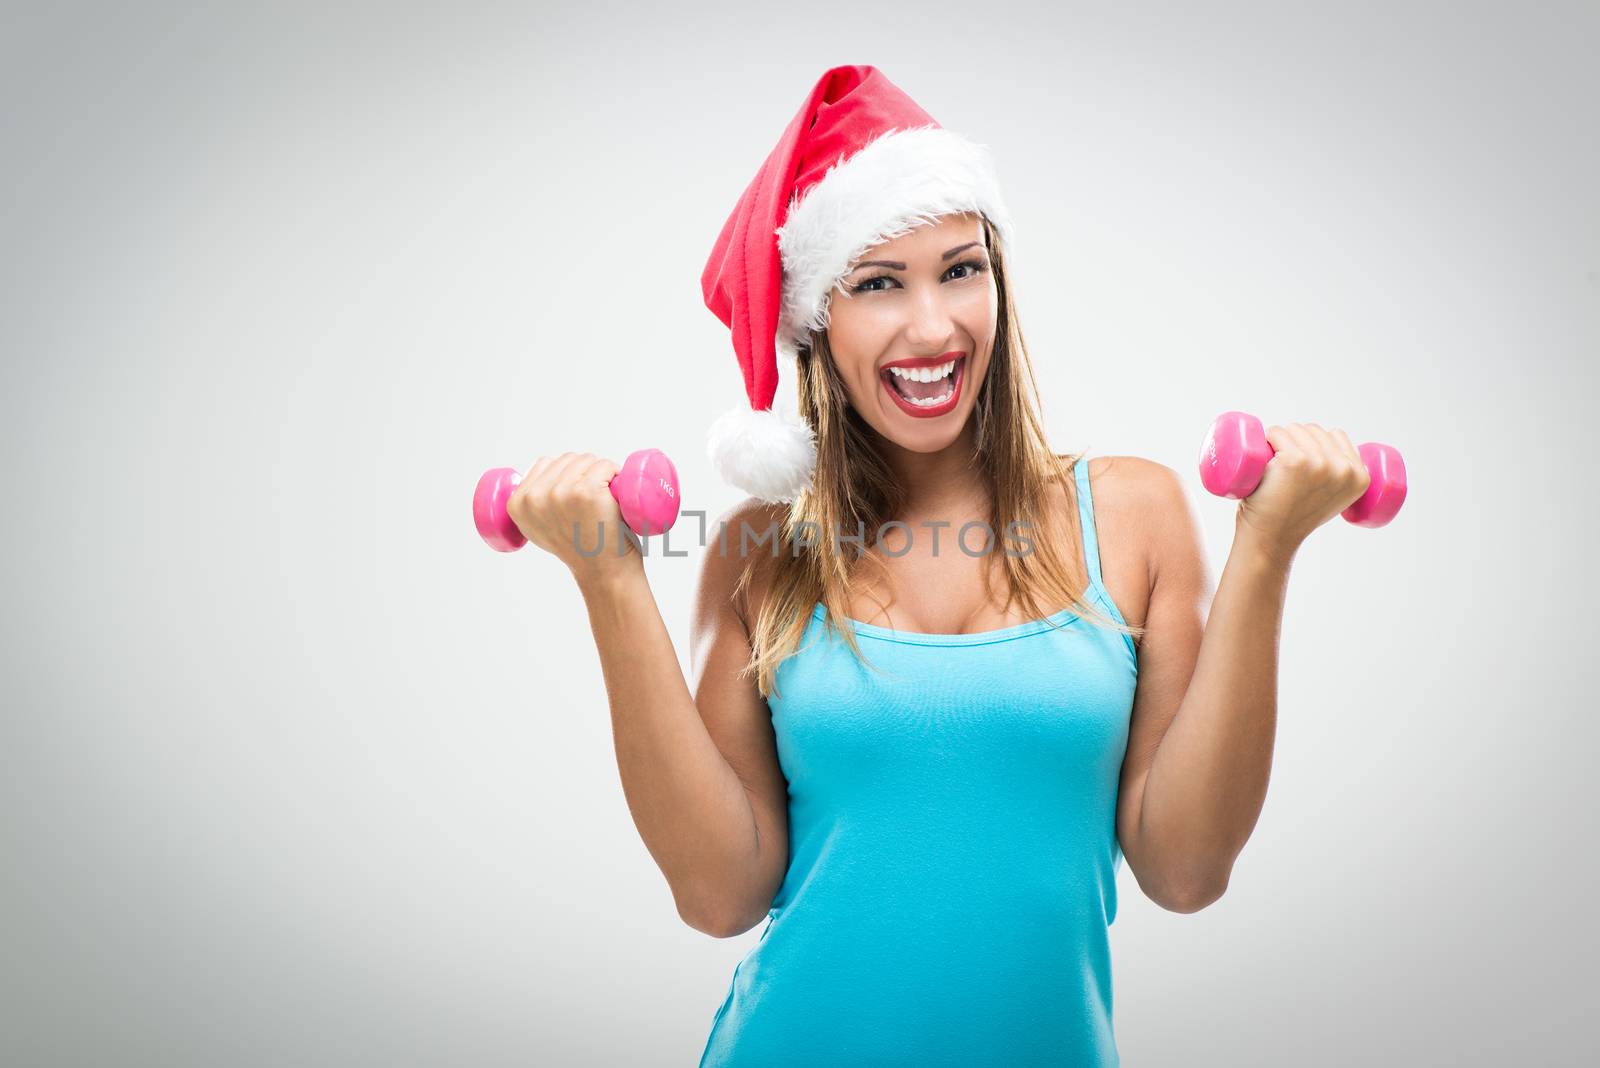 Christmas Fitness Woman by MilanMarkovic78